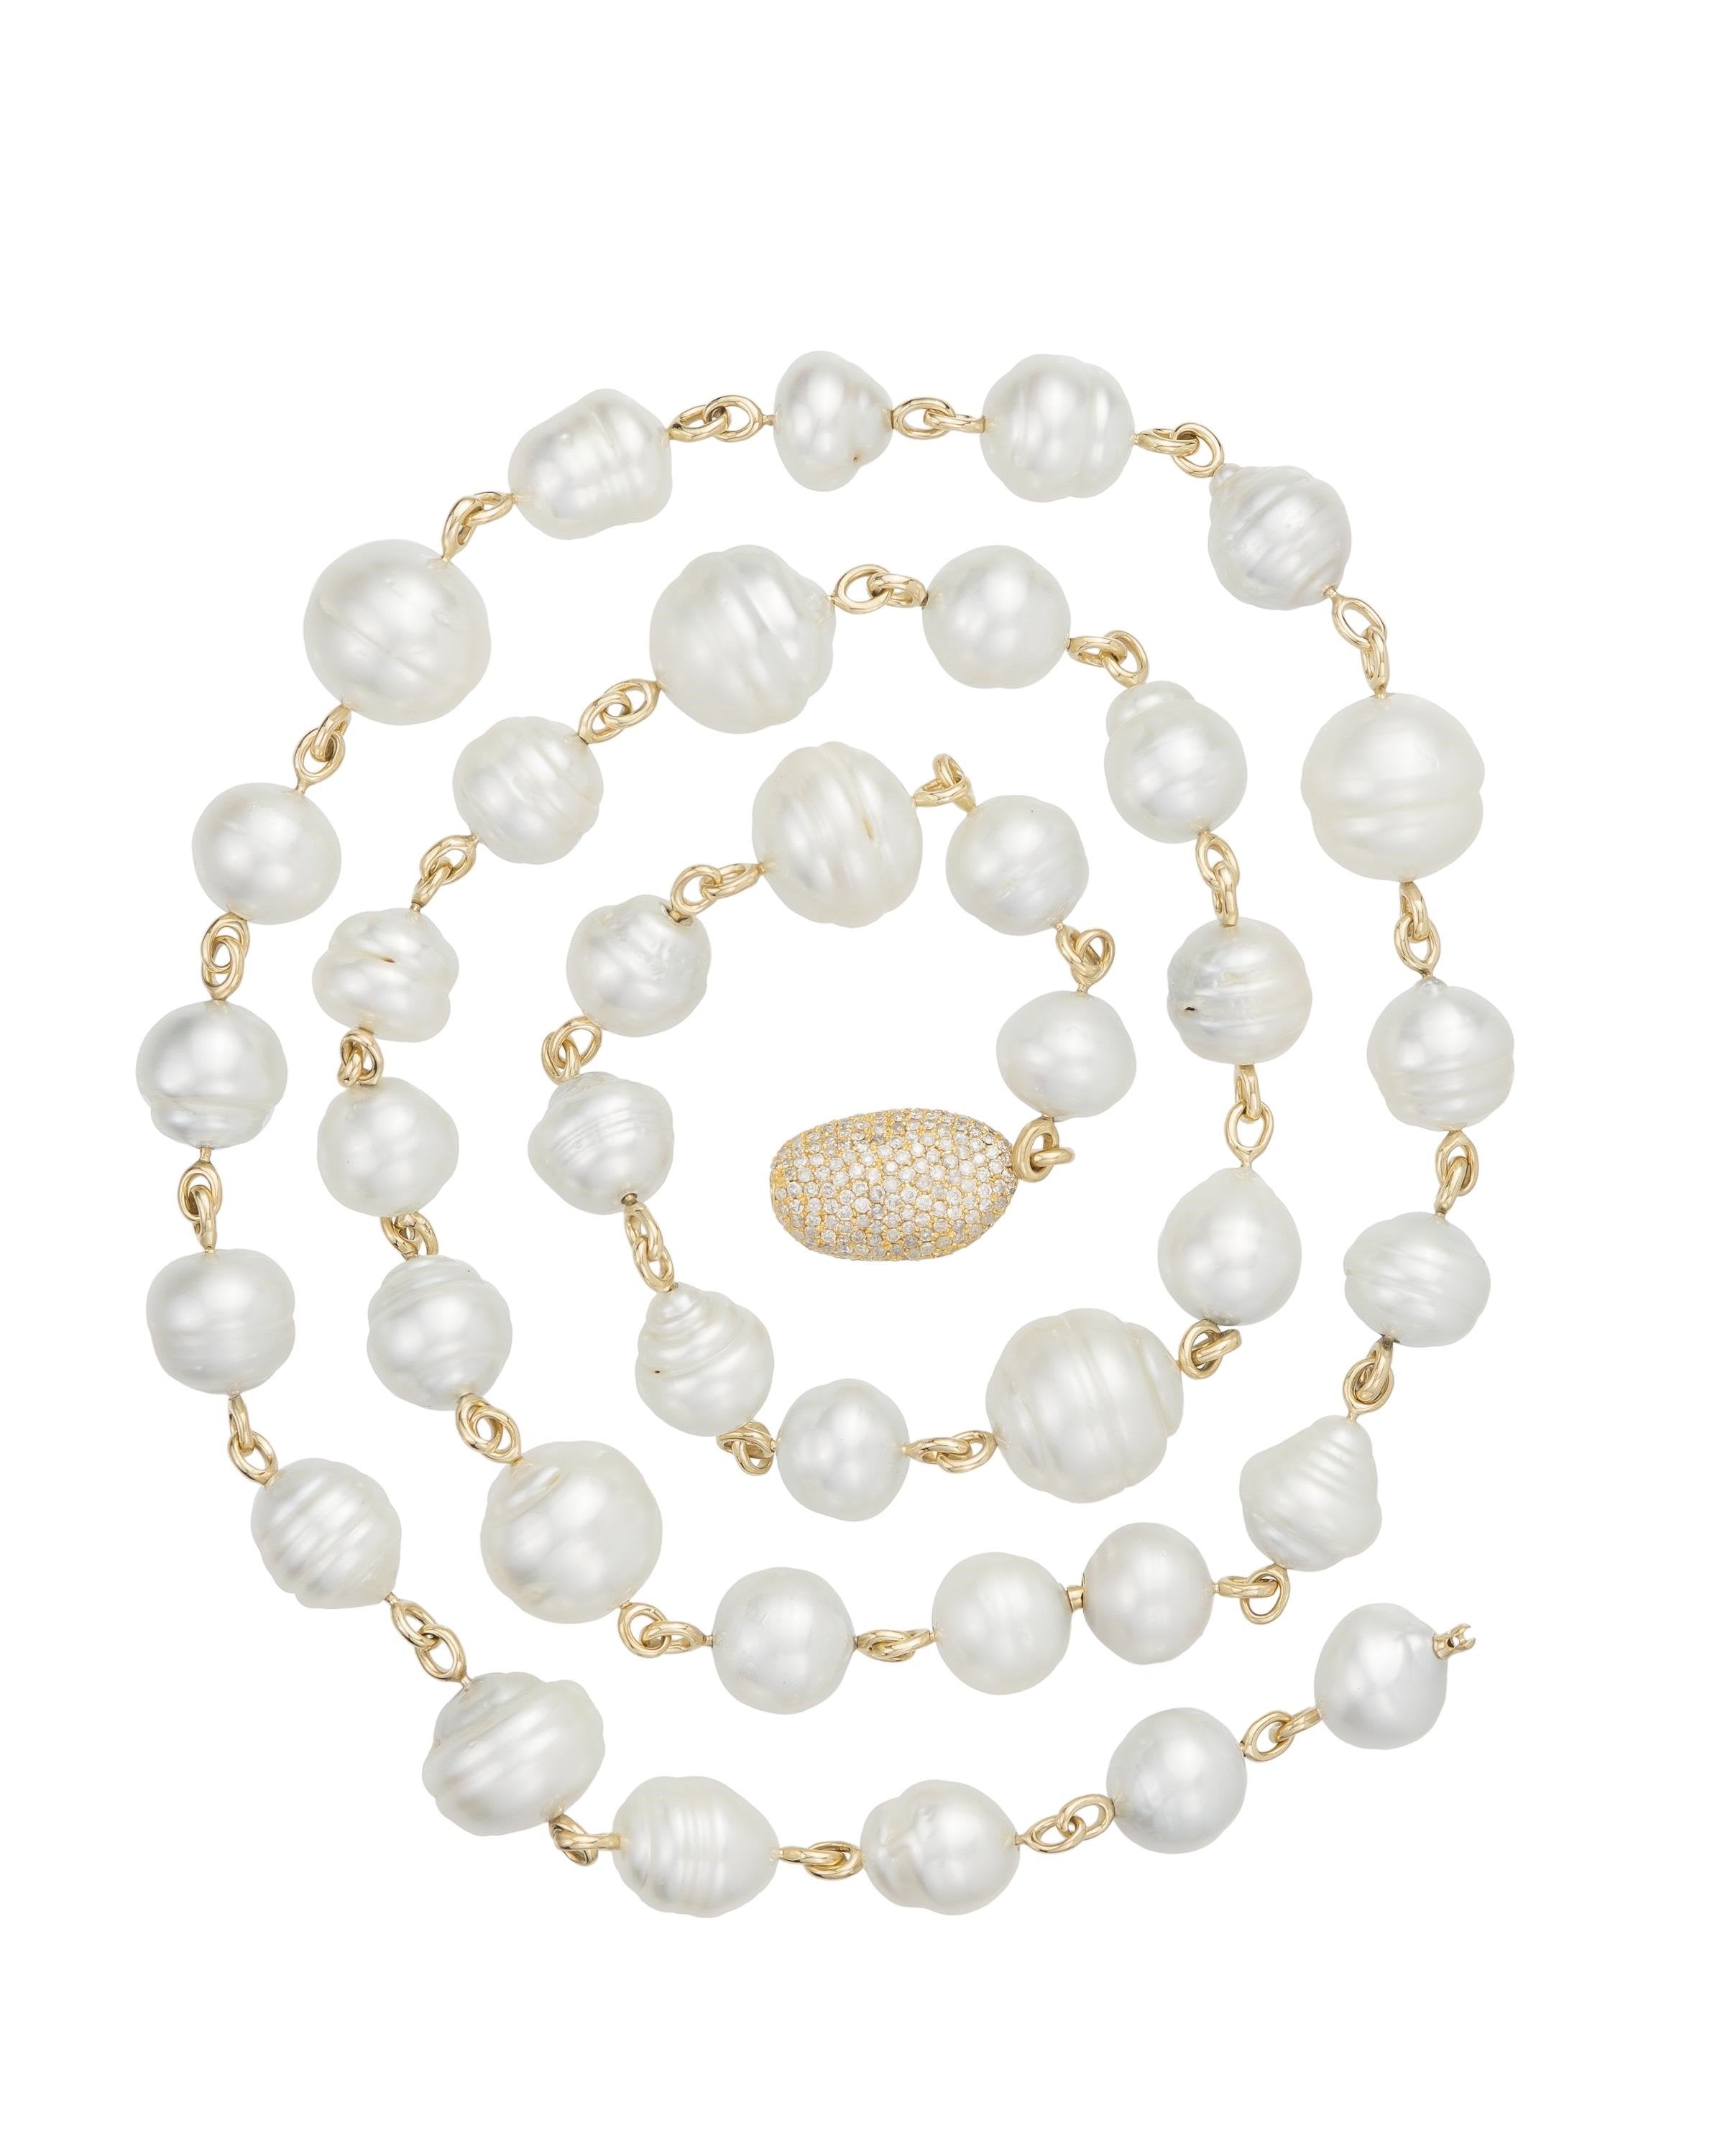 South Sea pearl and diamond necklace, crafted in 18 karat yellow gold.